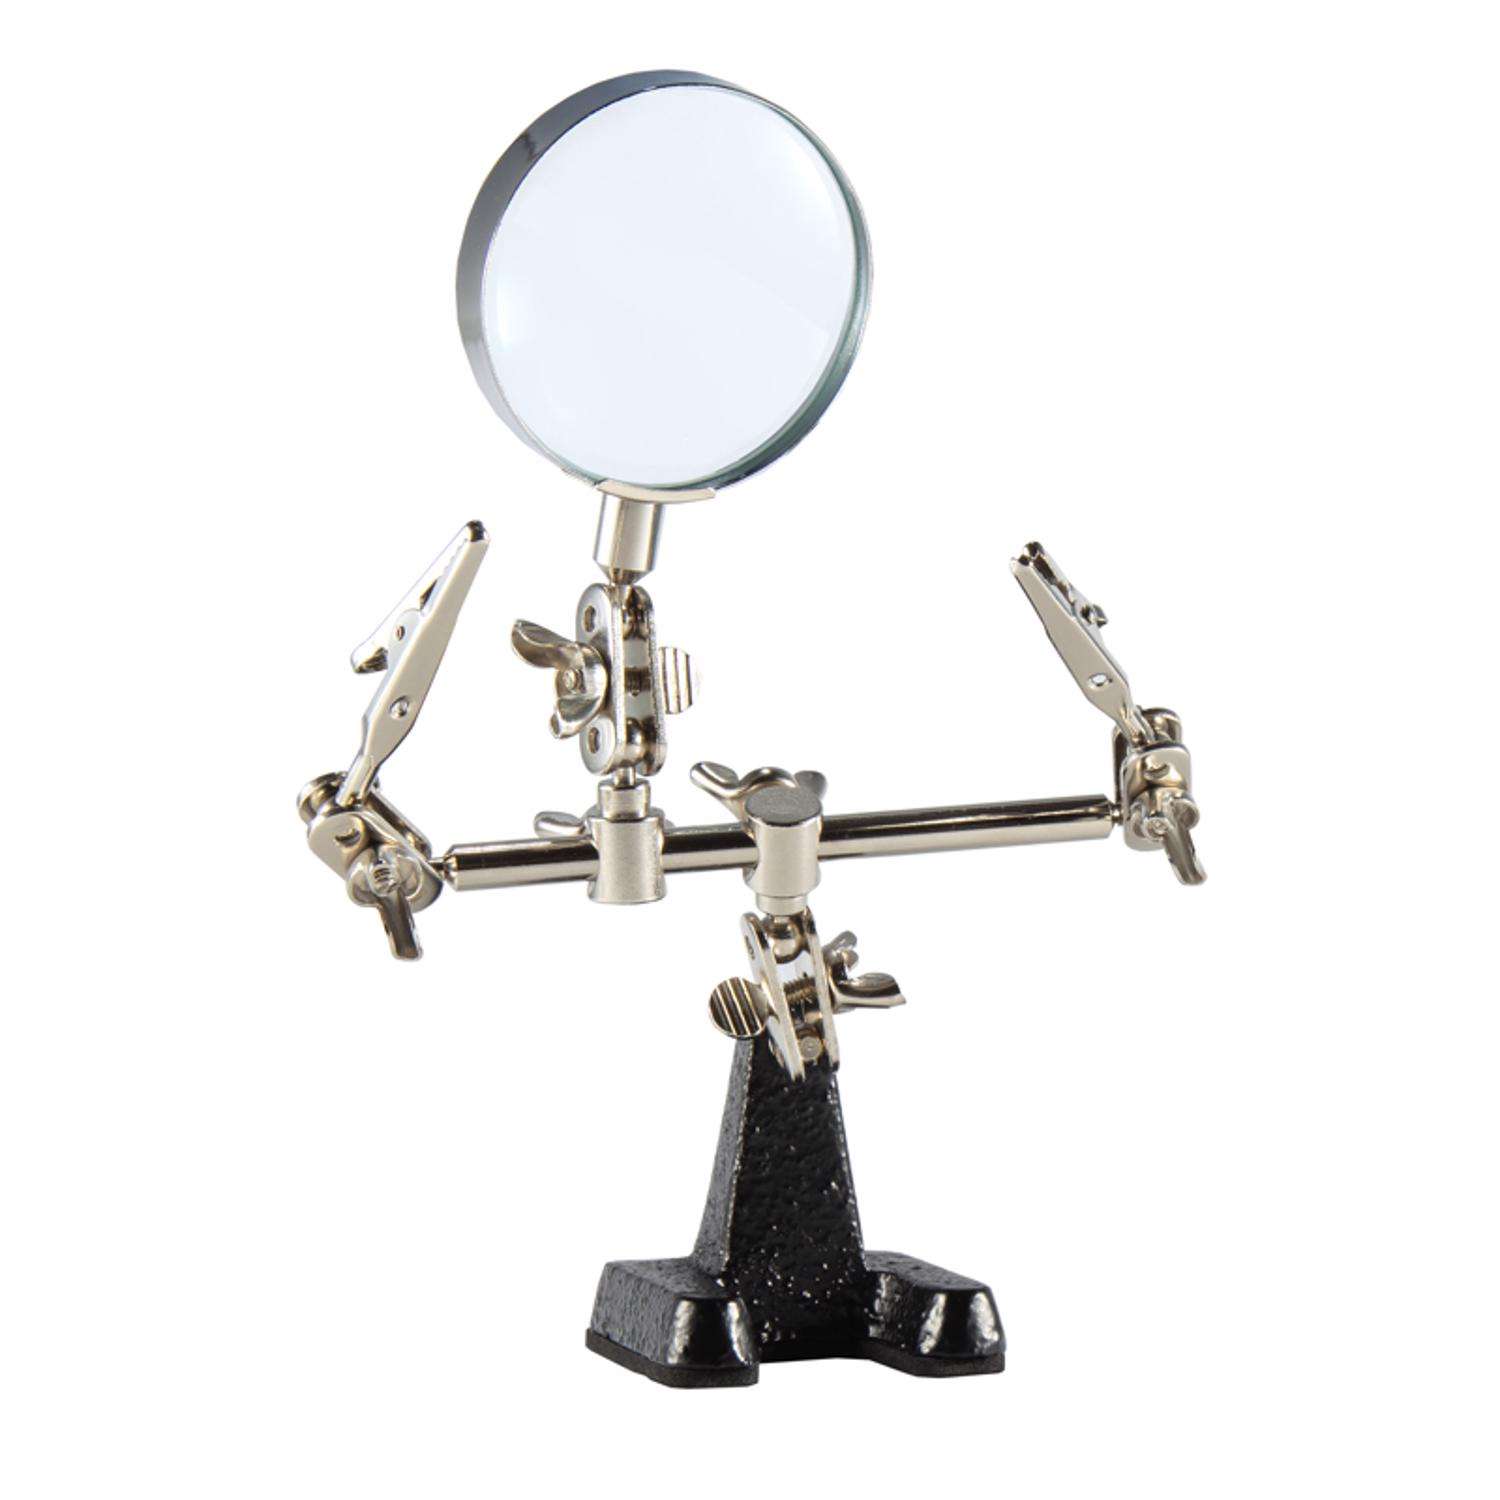 Helping Hand Magnifier Magnifying Glass Jewelry Clamp Holder Soldering Stand Hot 